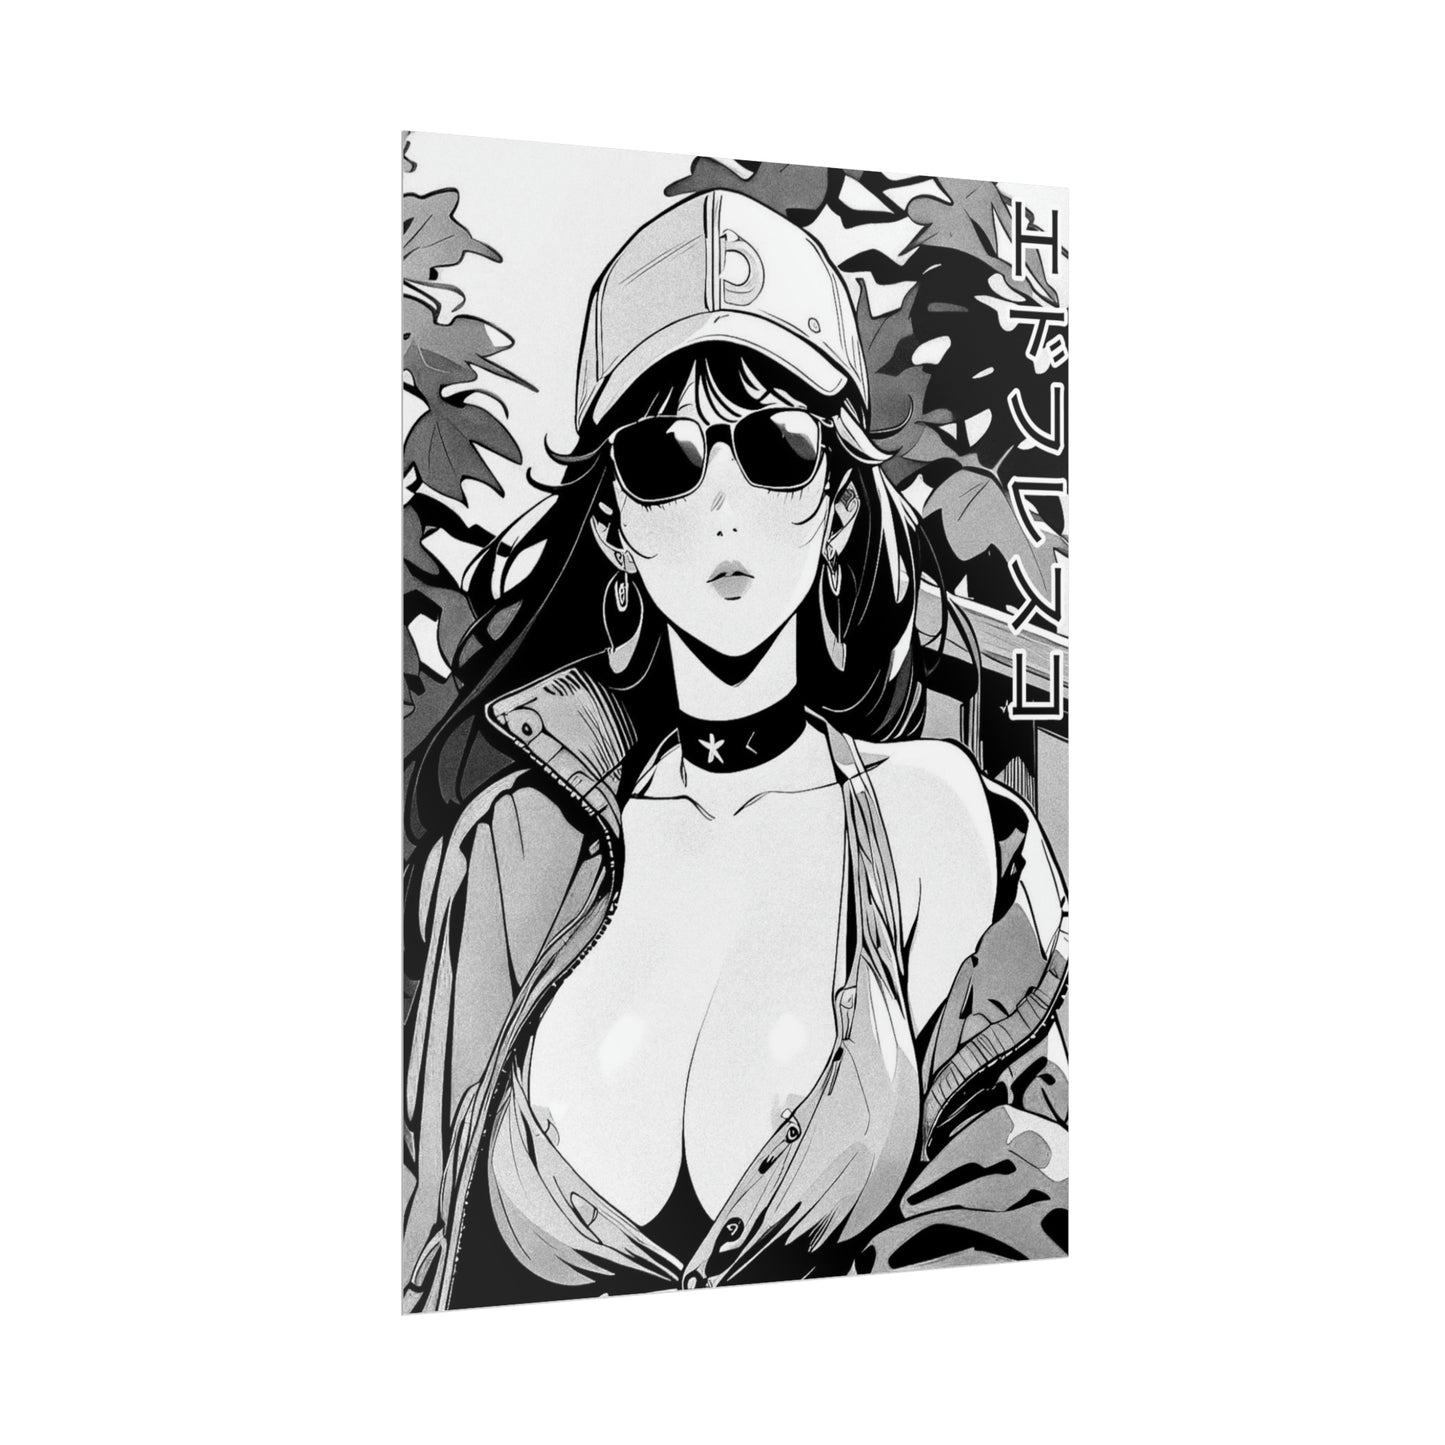 Anime Style Art Rolled Posters- "The Killer"